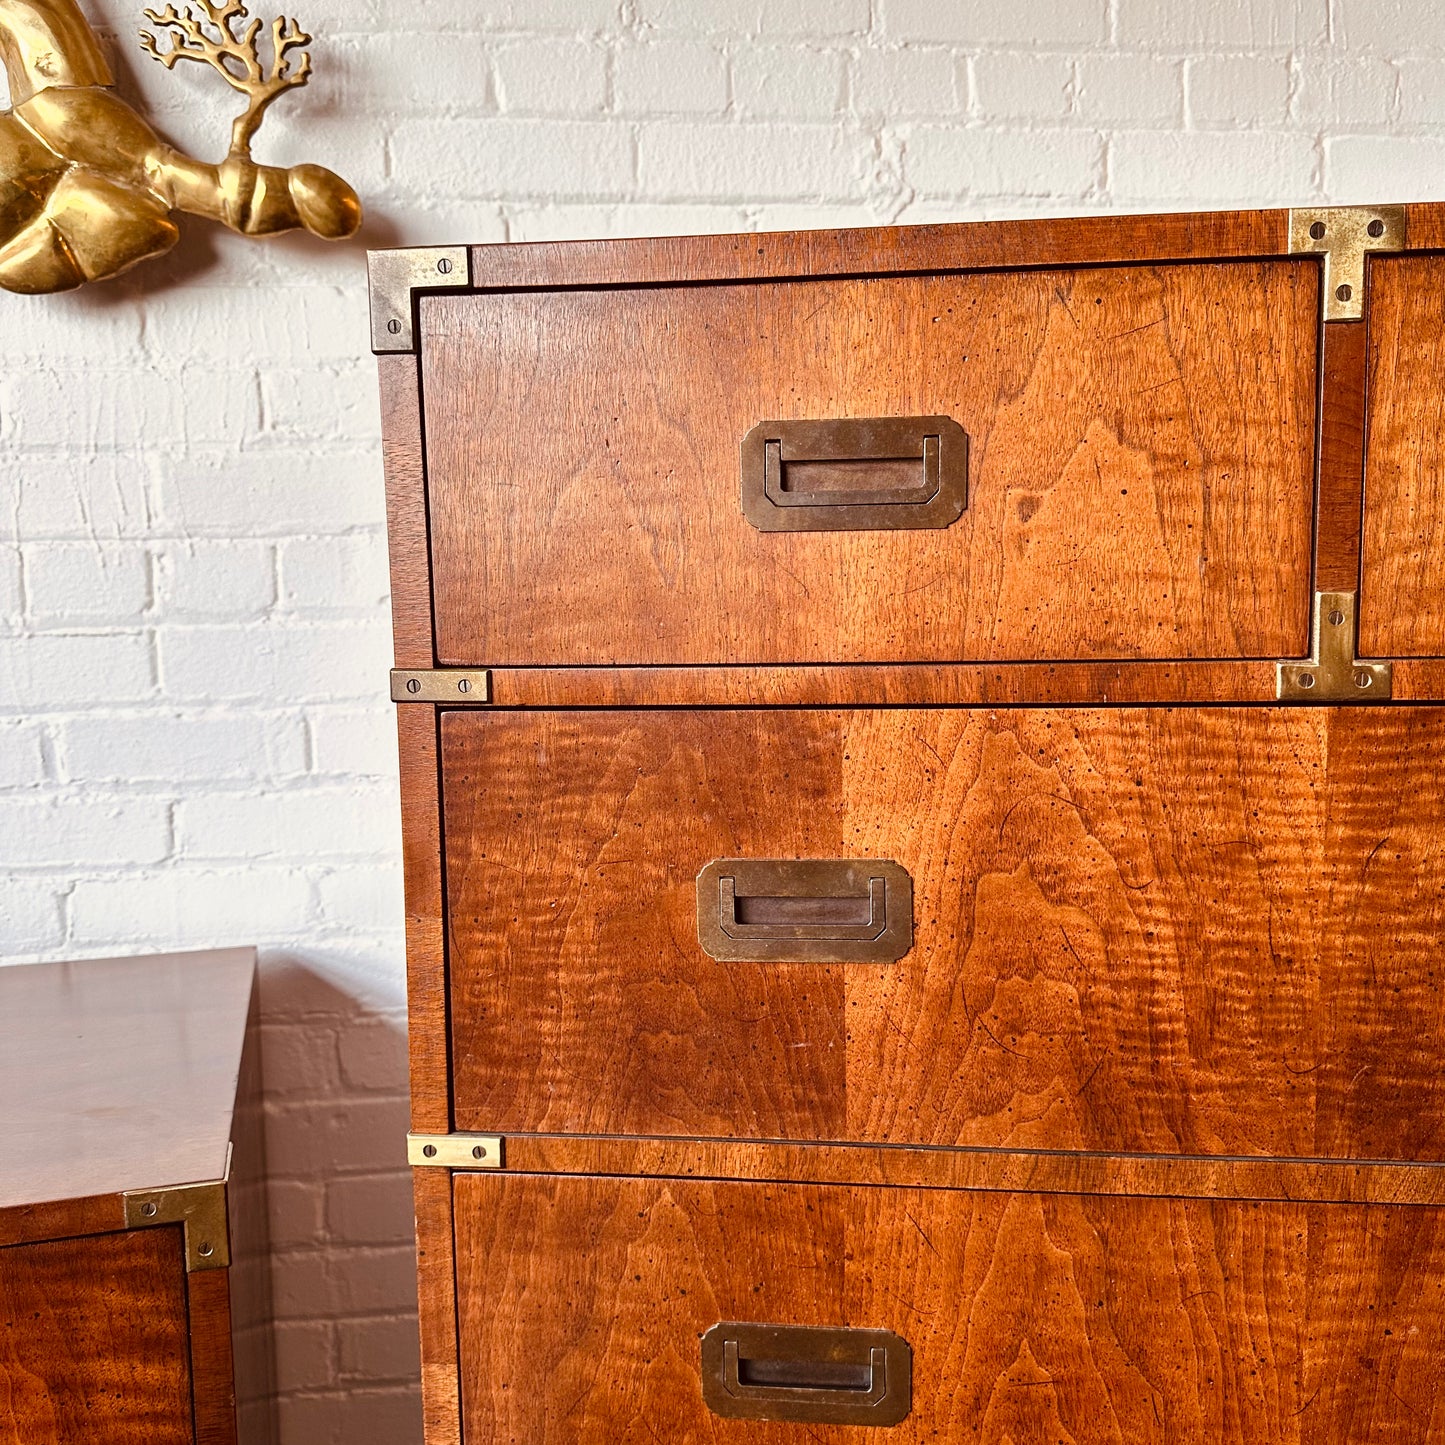 HENREDON CAMPAIGN STYLE TALL CHEST OF DRAWERS